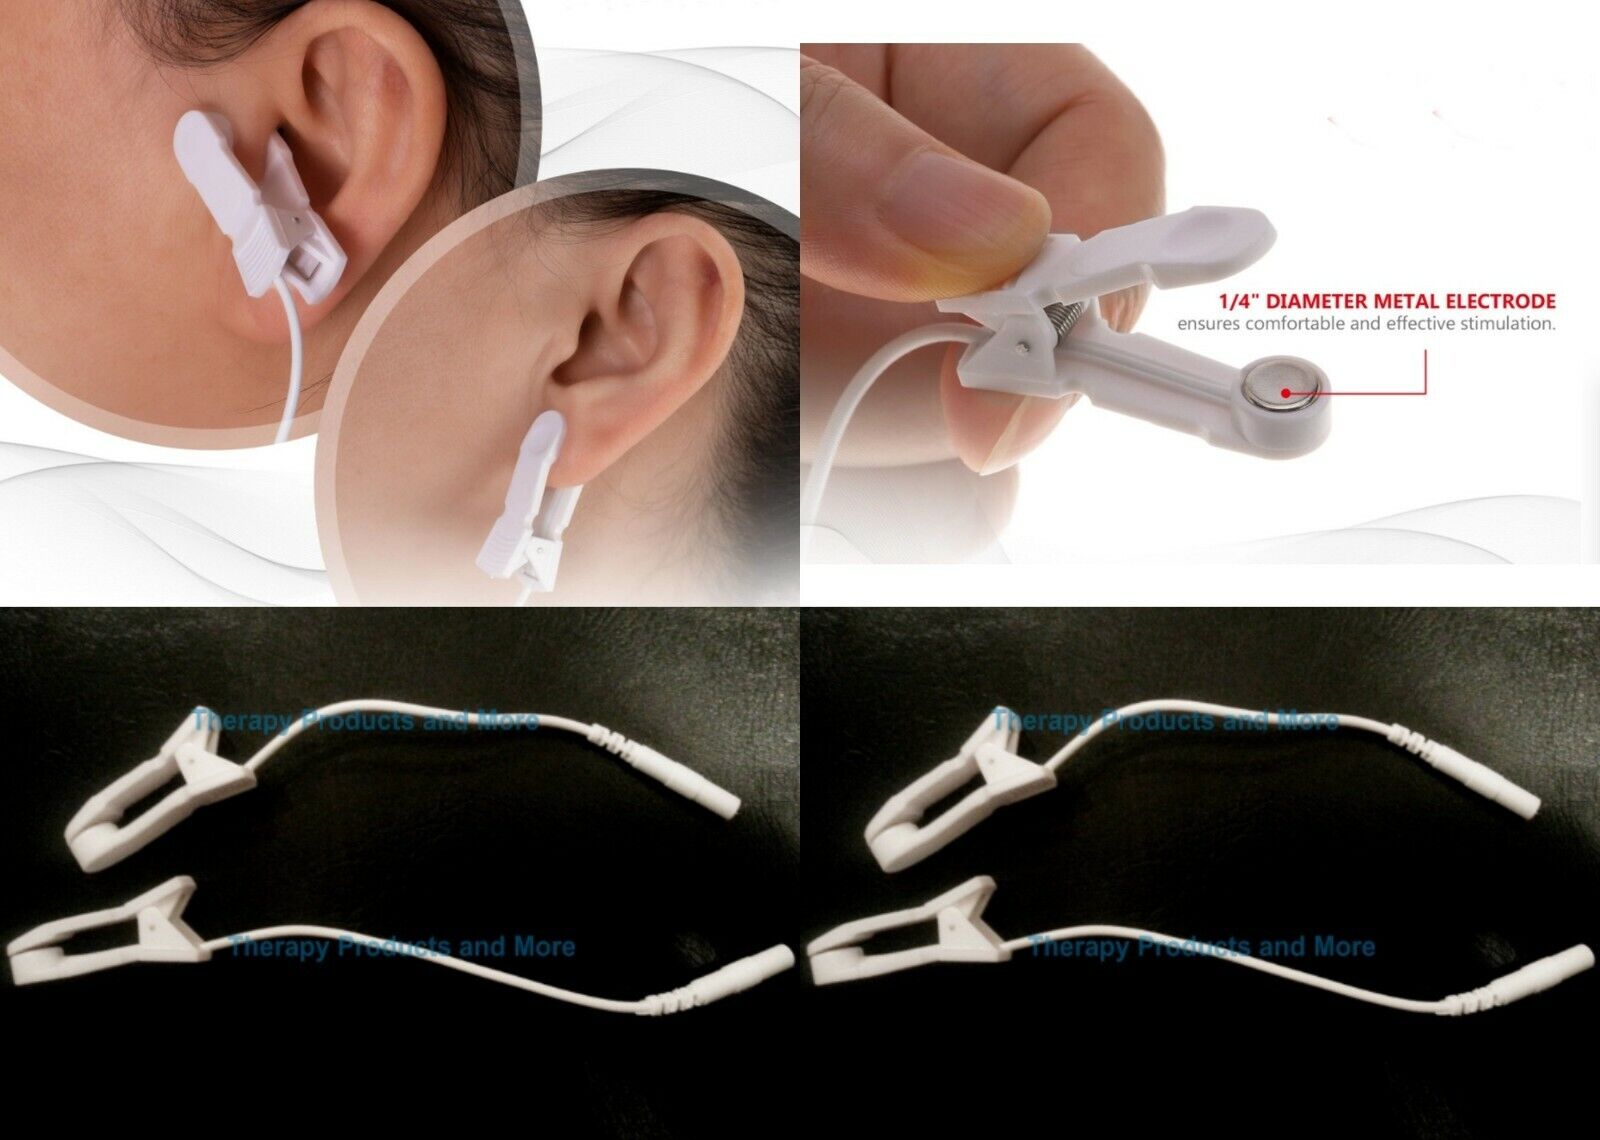 4 EAR CLIP CLAMP ELECTRODES FOR TENS, CES Unbranded does not apply